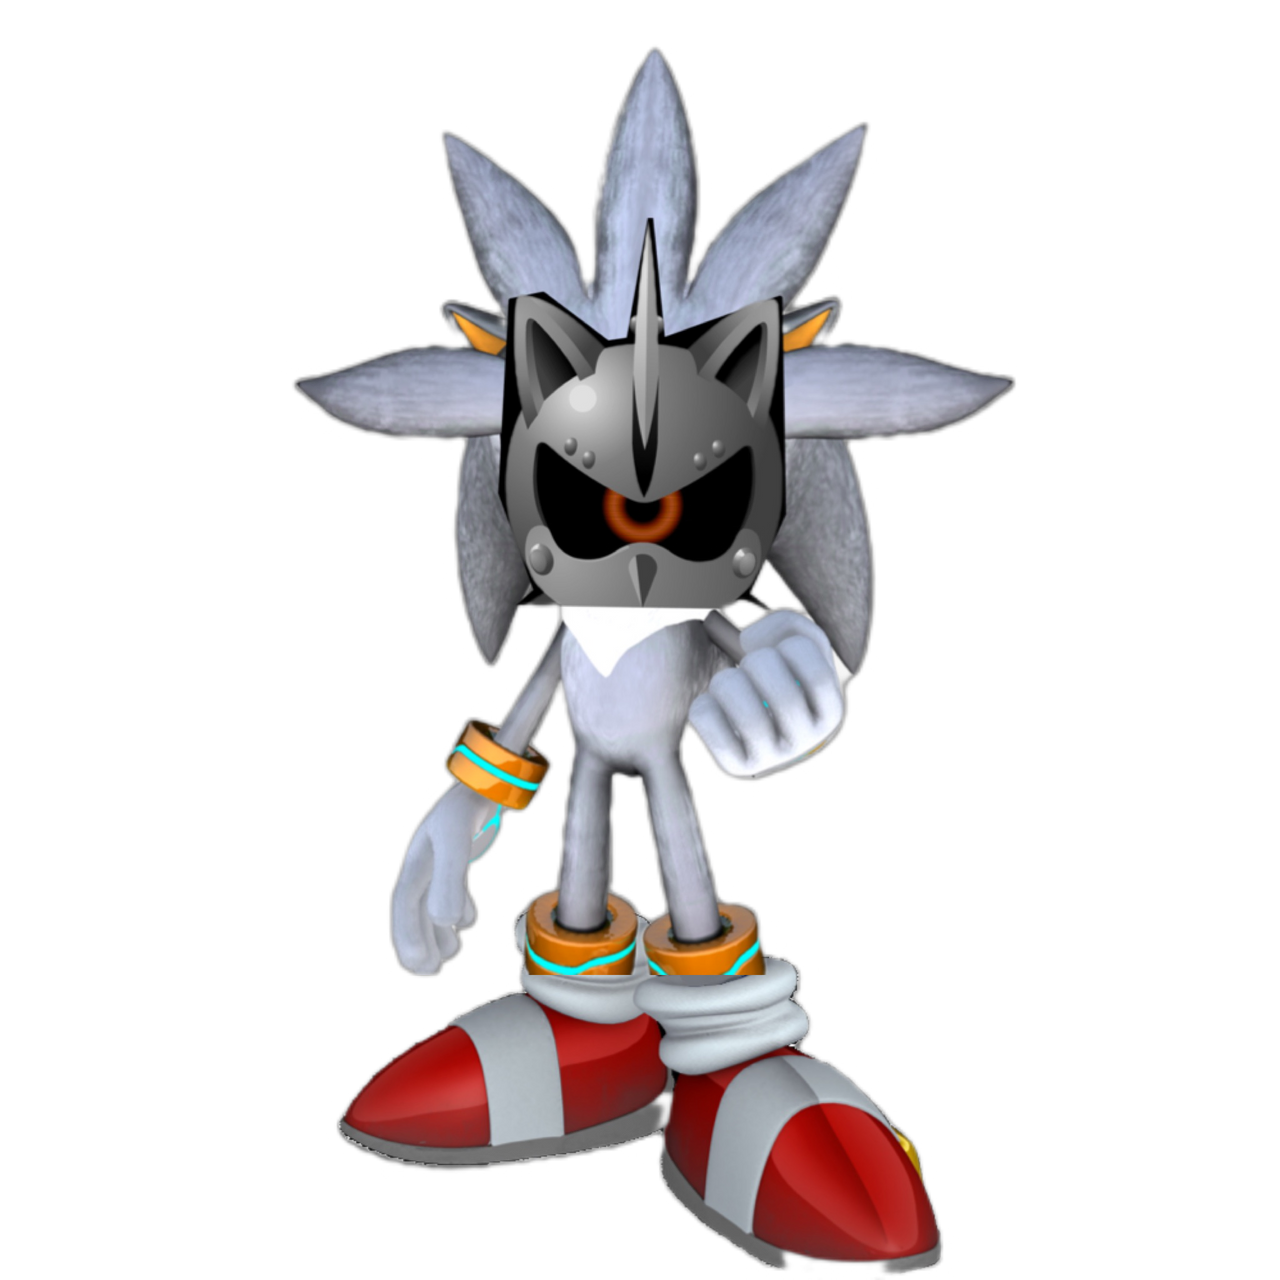 Sonic, Shadow and Silver Fusion by Sonicshadow2001 on DeviantArt